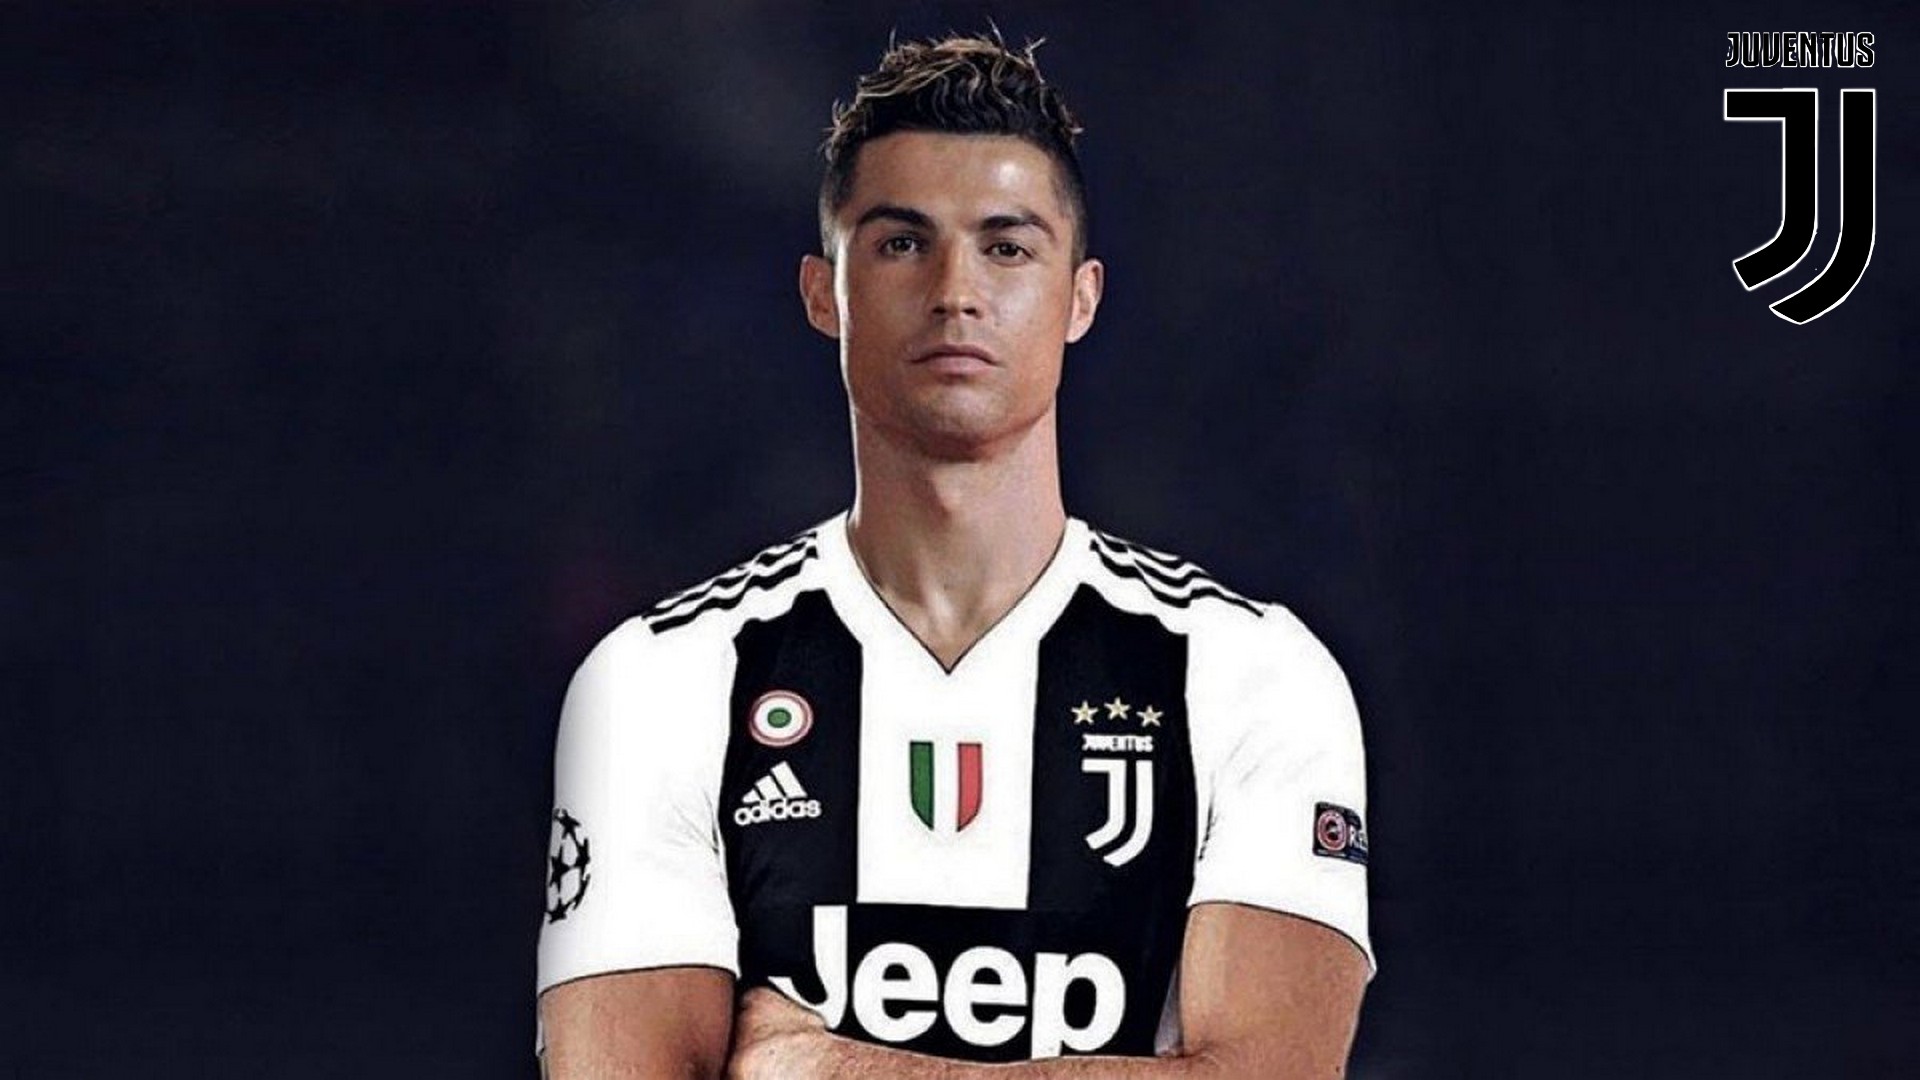 Christiano Ronaldo Juventus Wallpaper With Resolution 1920X1080 pixel. You can make this wallpaper for your Mac or Windows Desktop Background, iPhone, Android or Tablet and another Smartphone device for free